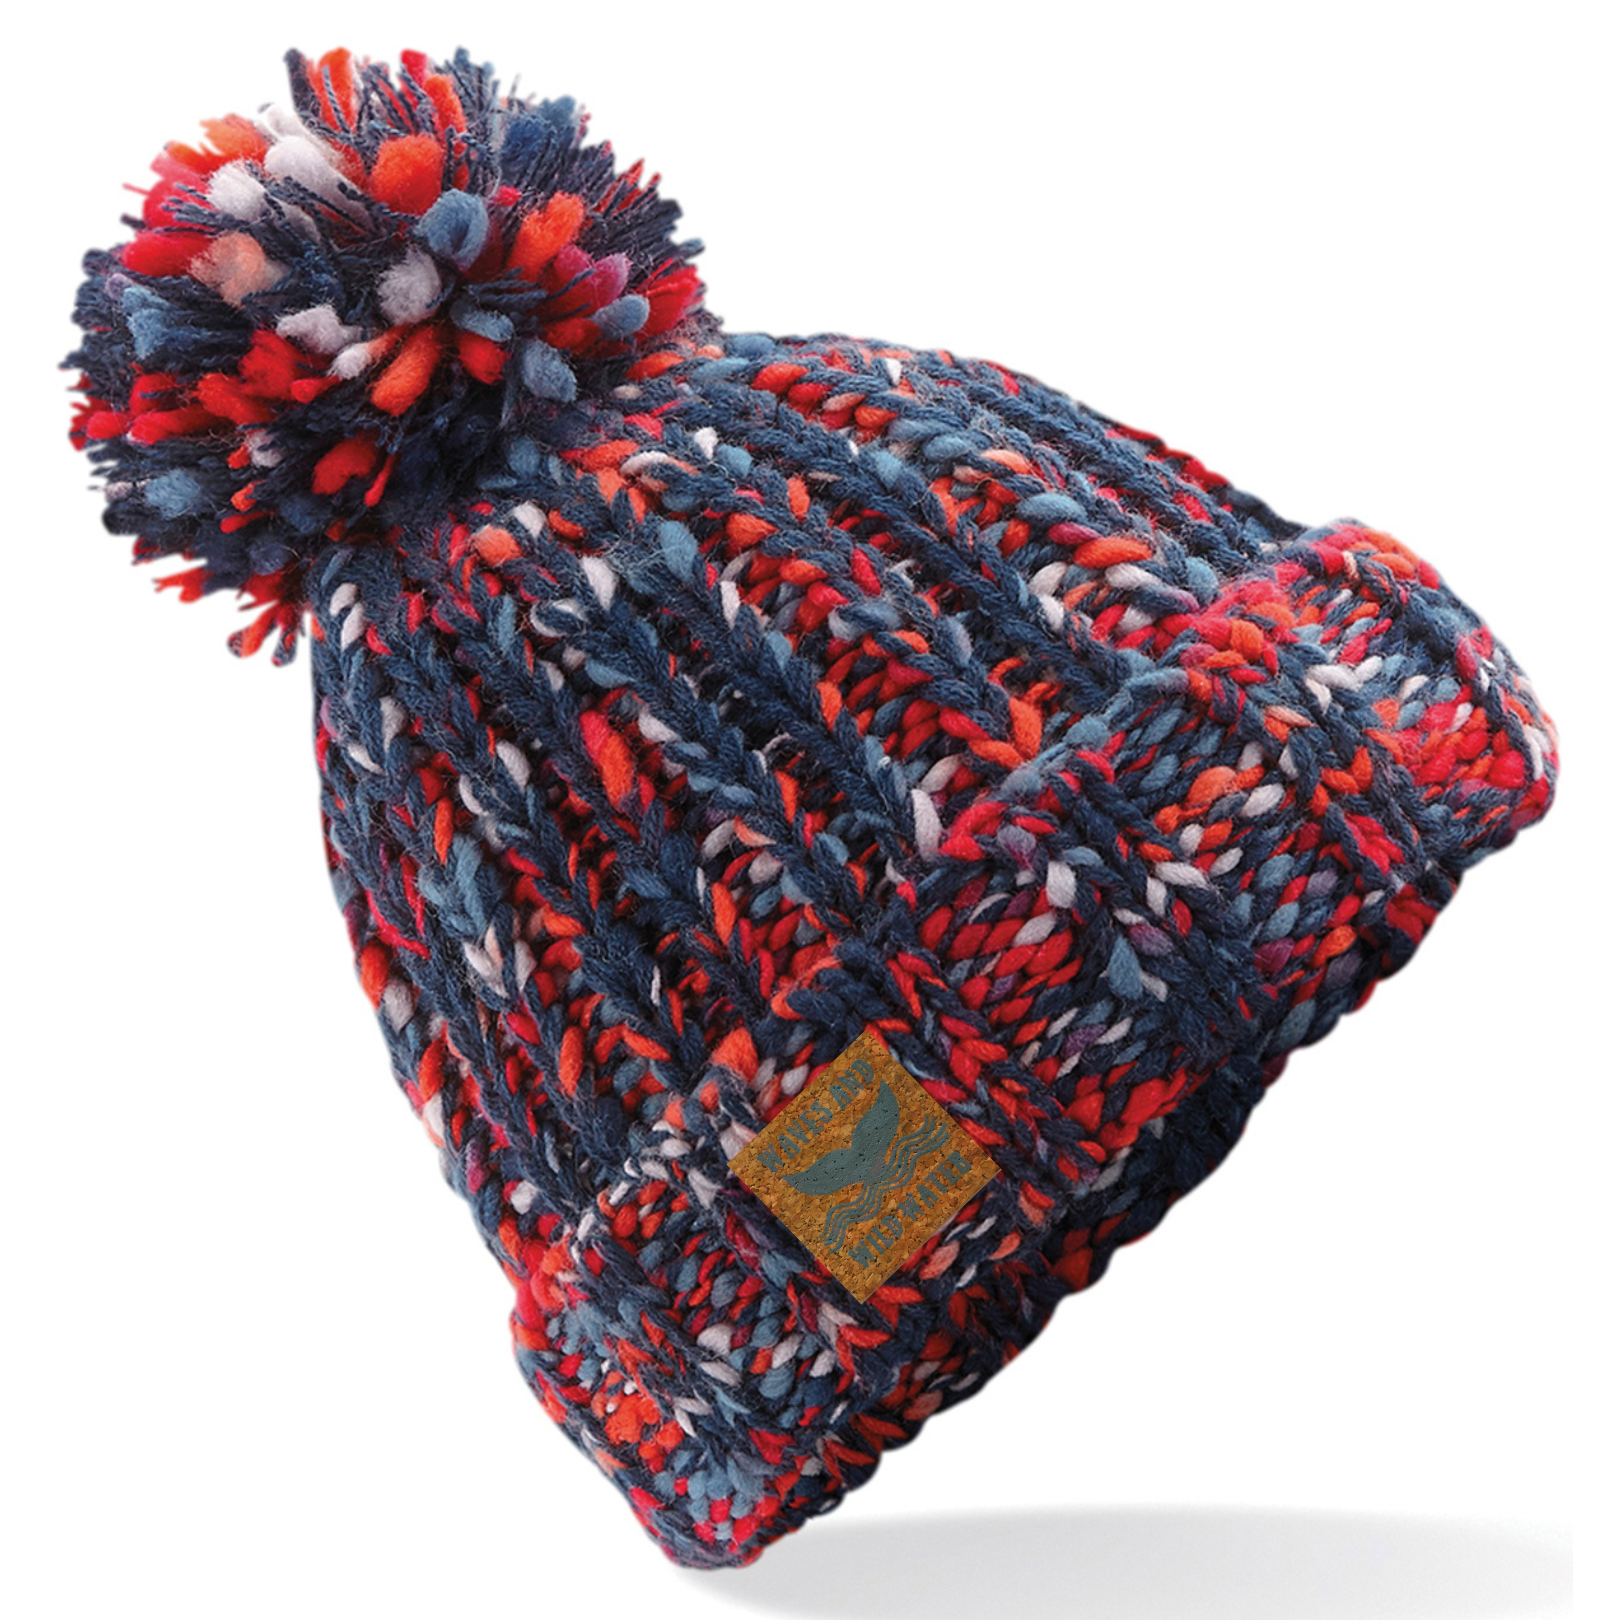 A red and blue chunky knitted beanie hat with a pom pom.